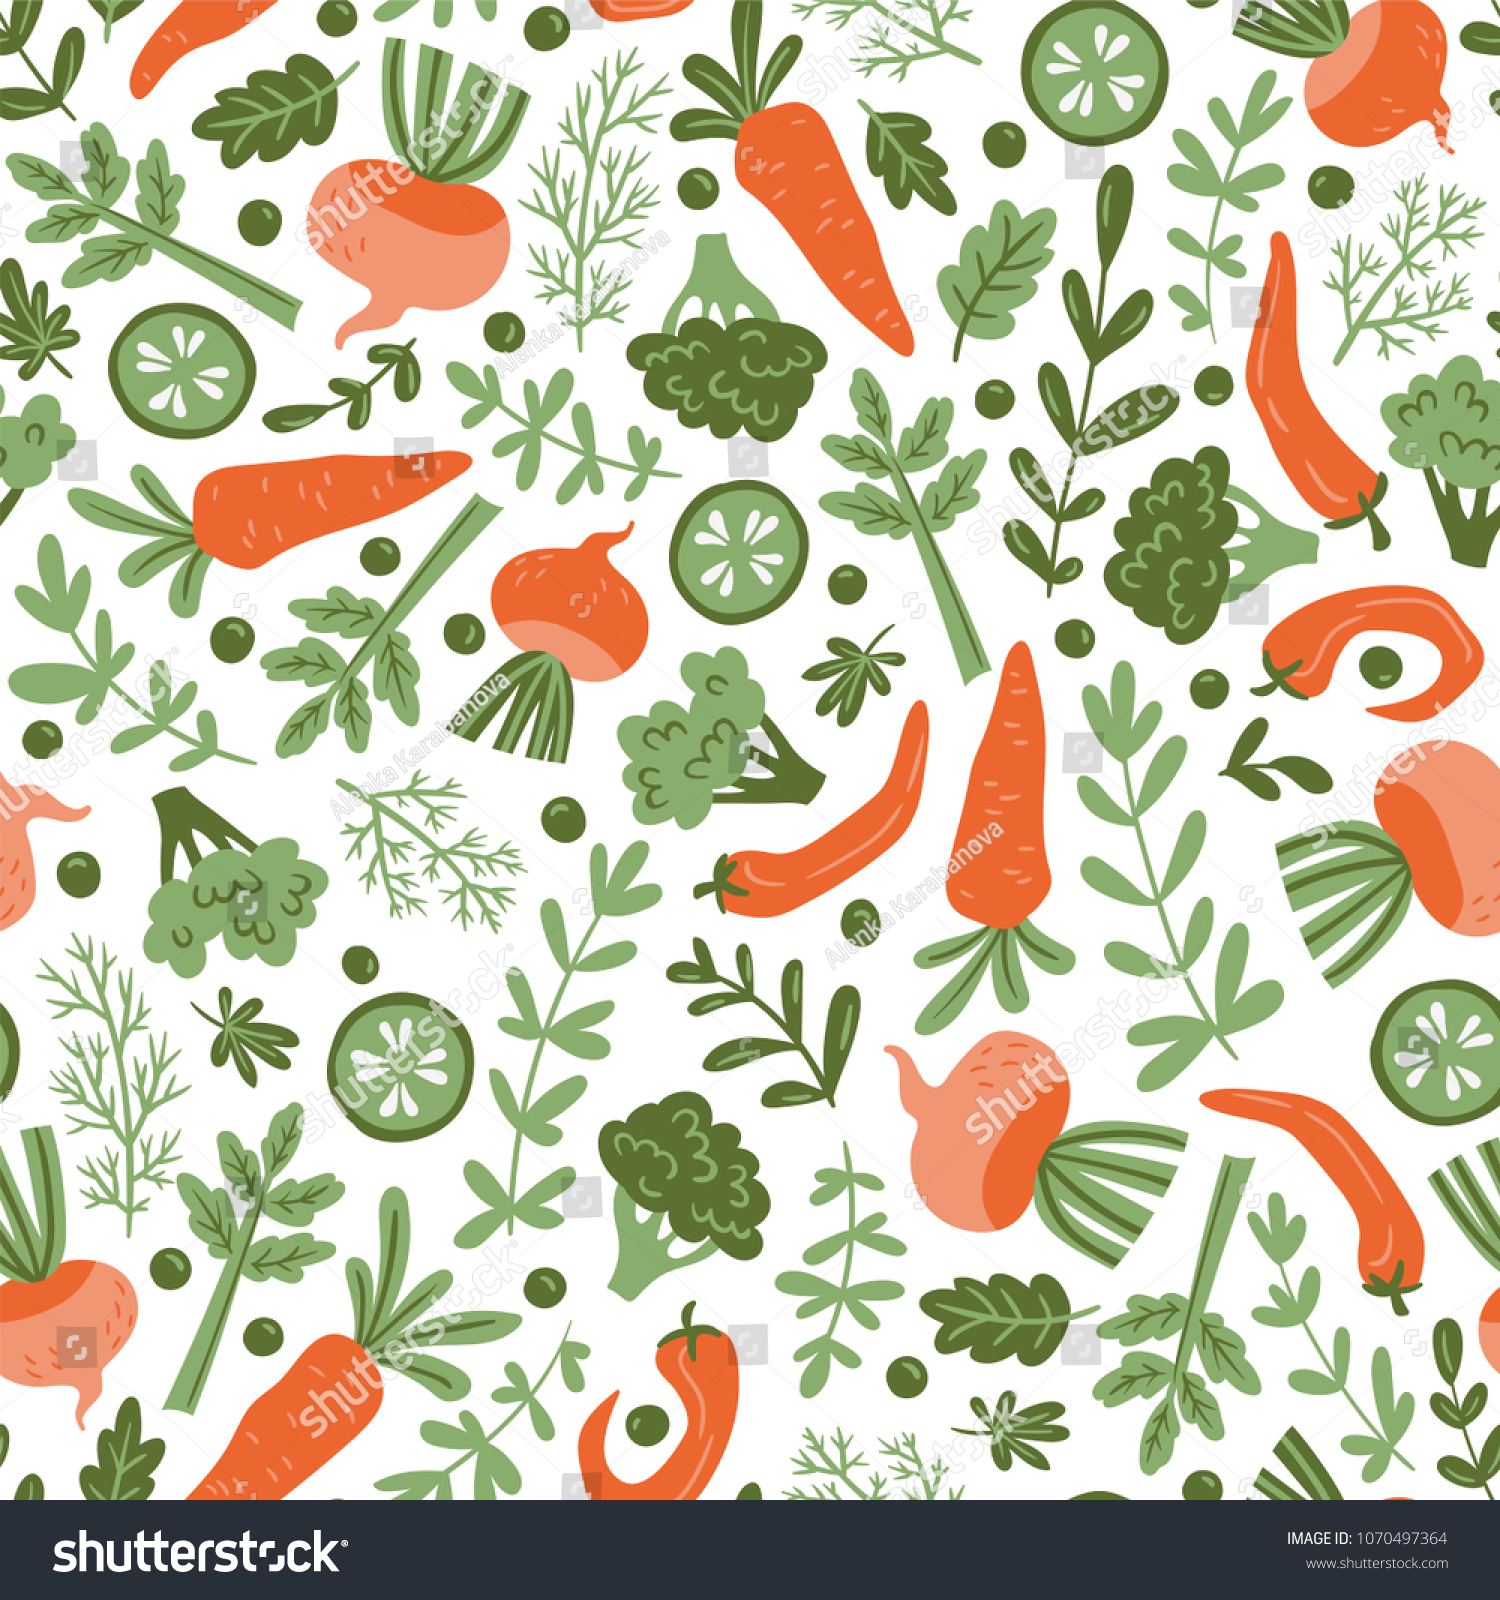 Seamless pattern with hand drawn colorful doodle vegetables. Vegetarian meal. Vegetable repeated background. Healthy restaurant  menu. #1070497364